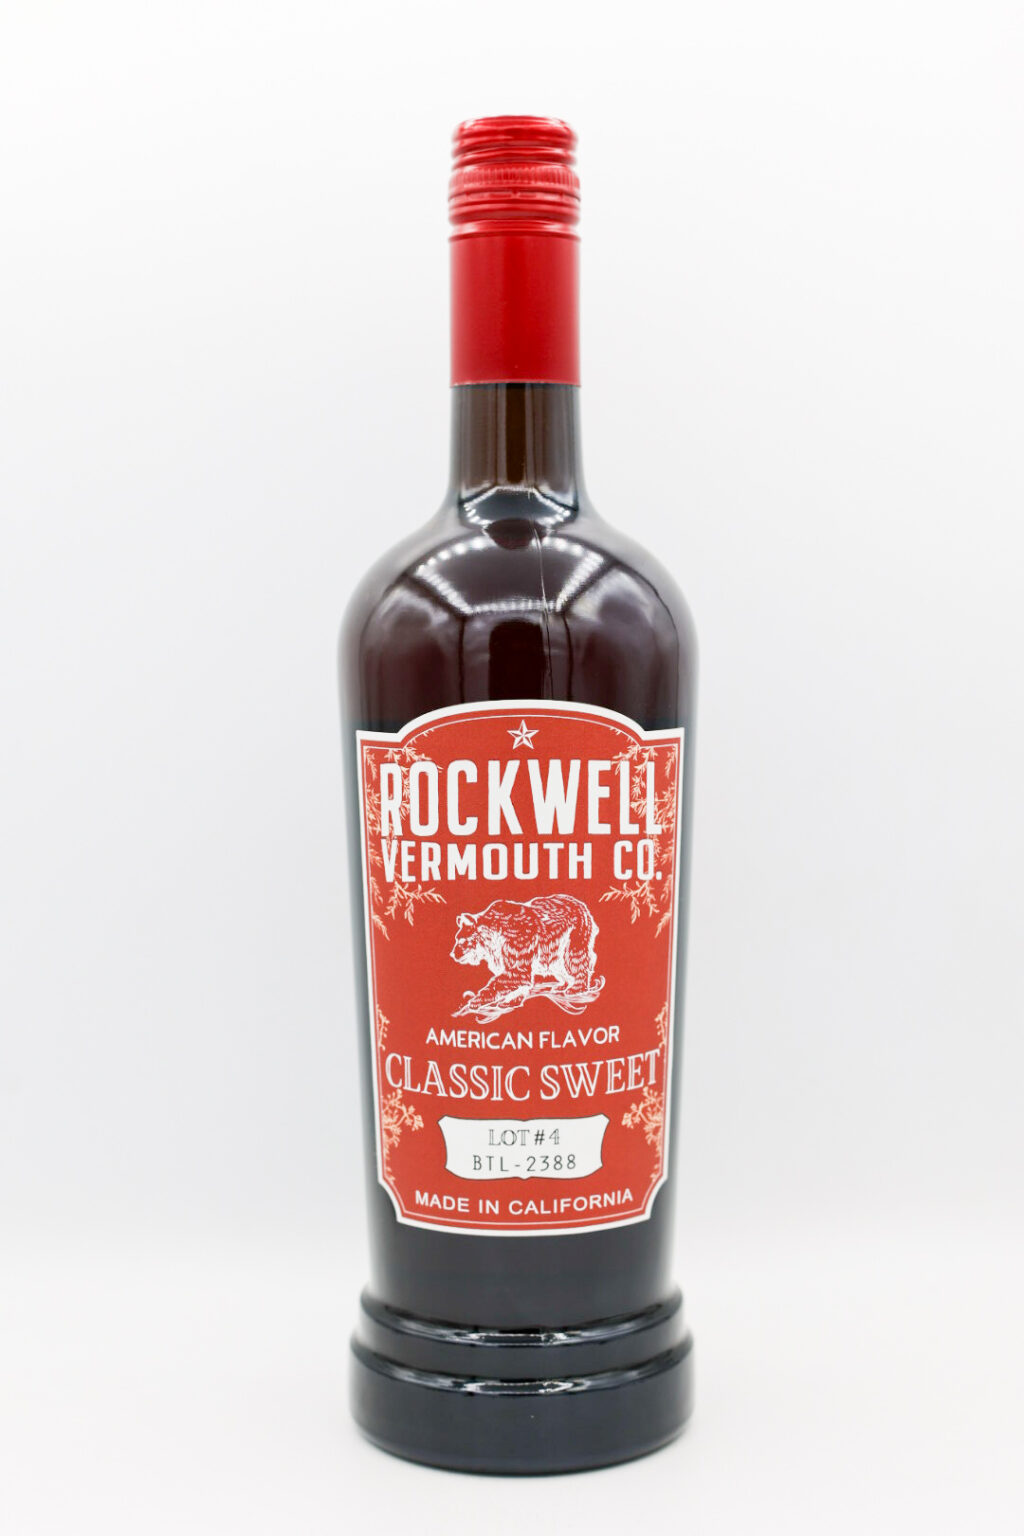 Rockwell Vermouth Co. Classic Sweet Vermouth Lot No. 1 750ml